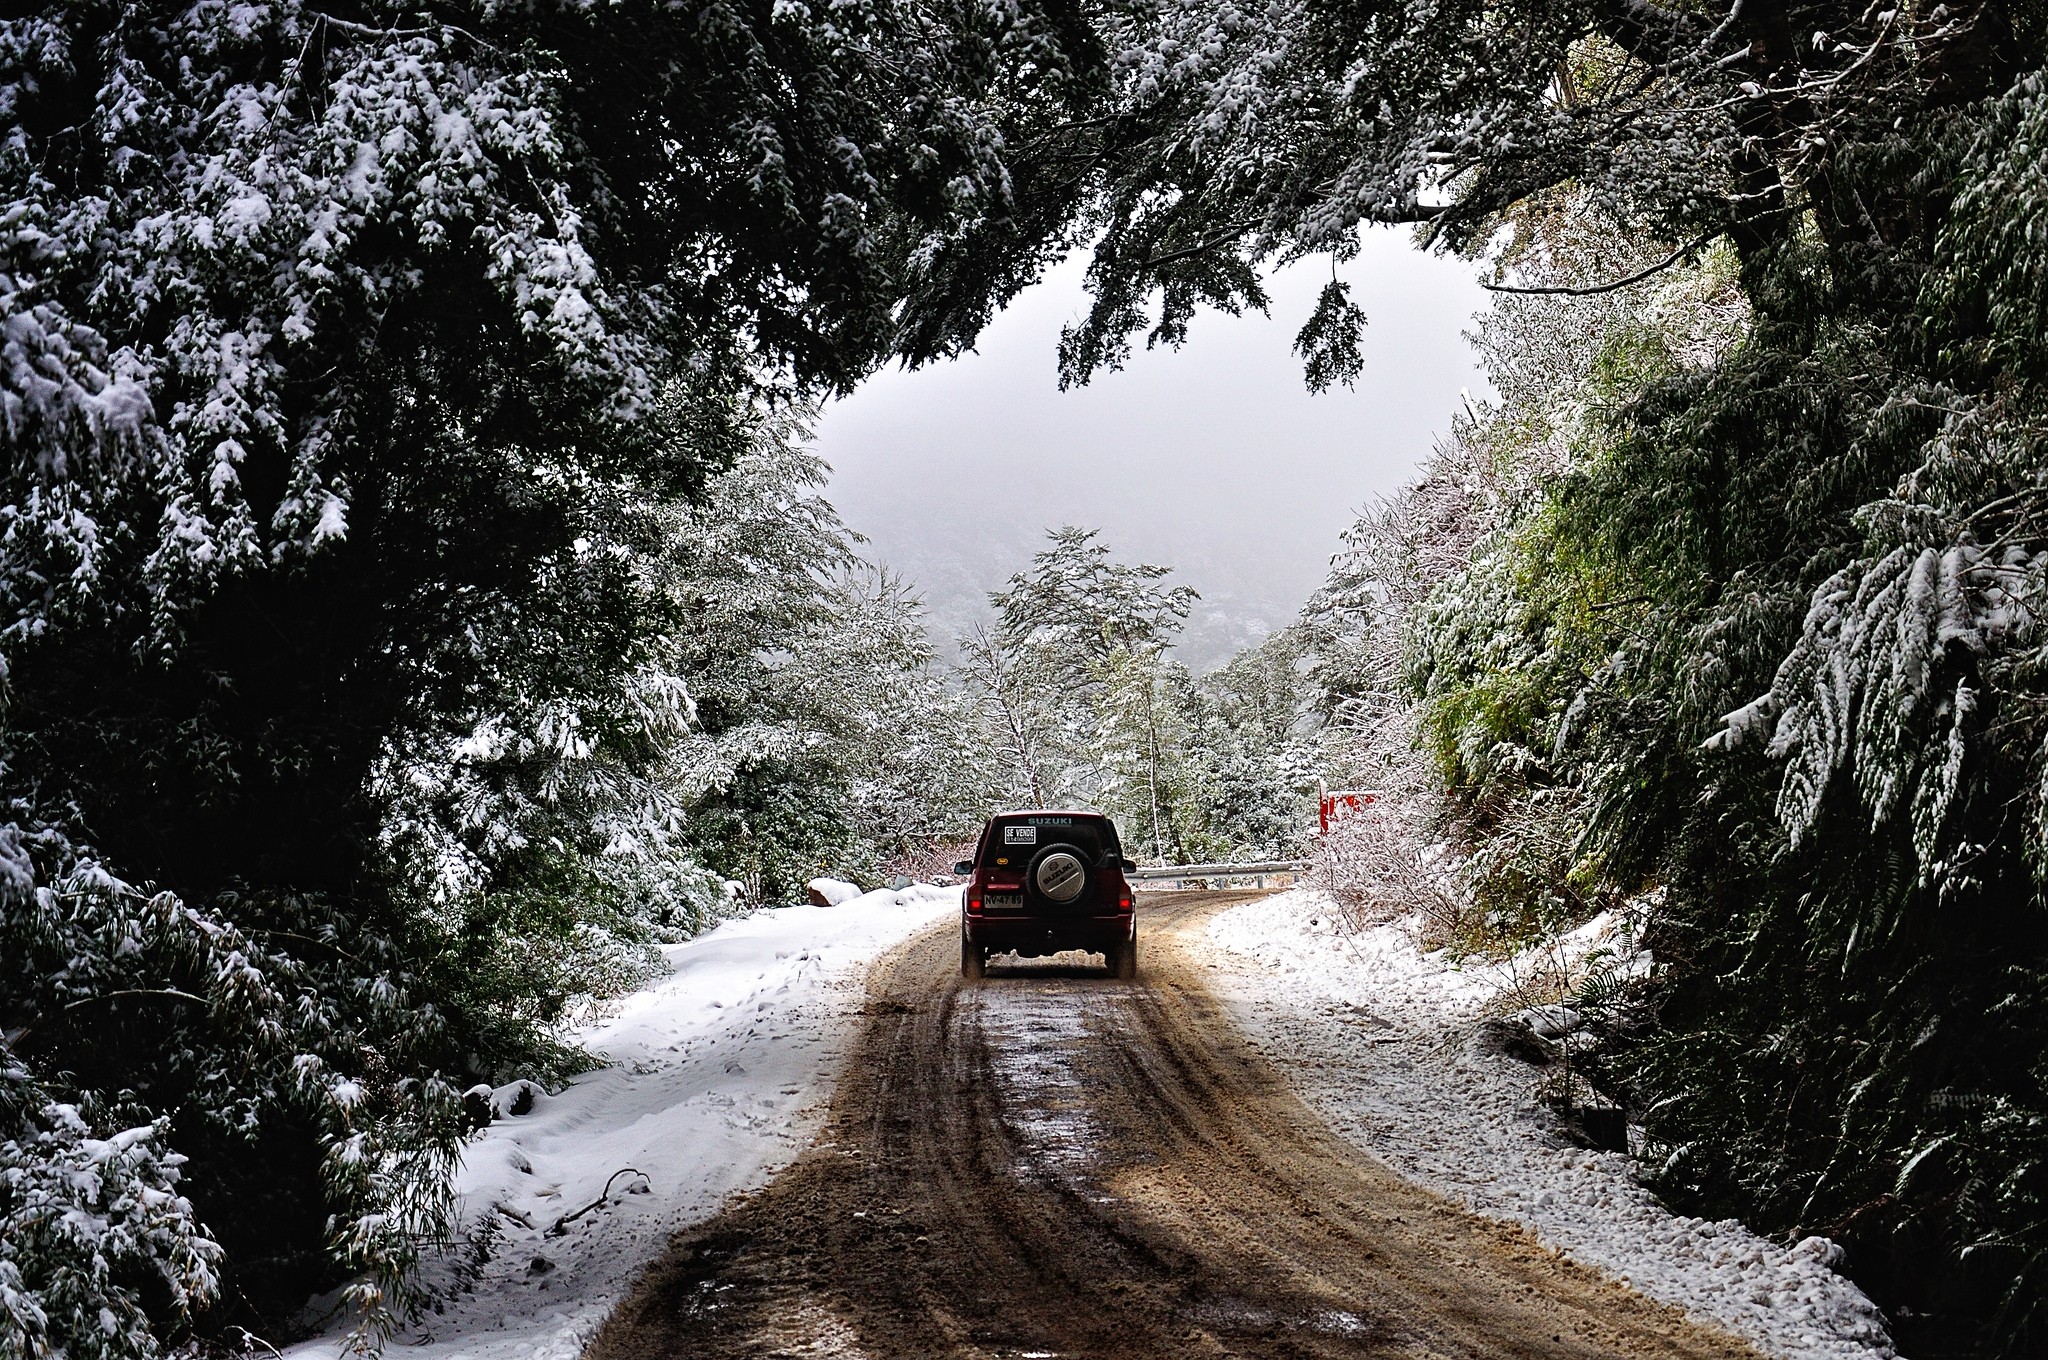 General 2048x1360 nature photography winter forest dirt road snow cold 4x4 trees national park Chile car vehicle South America